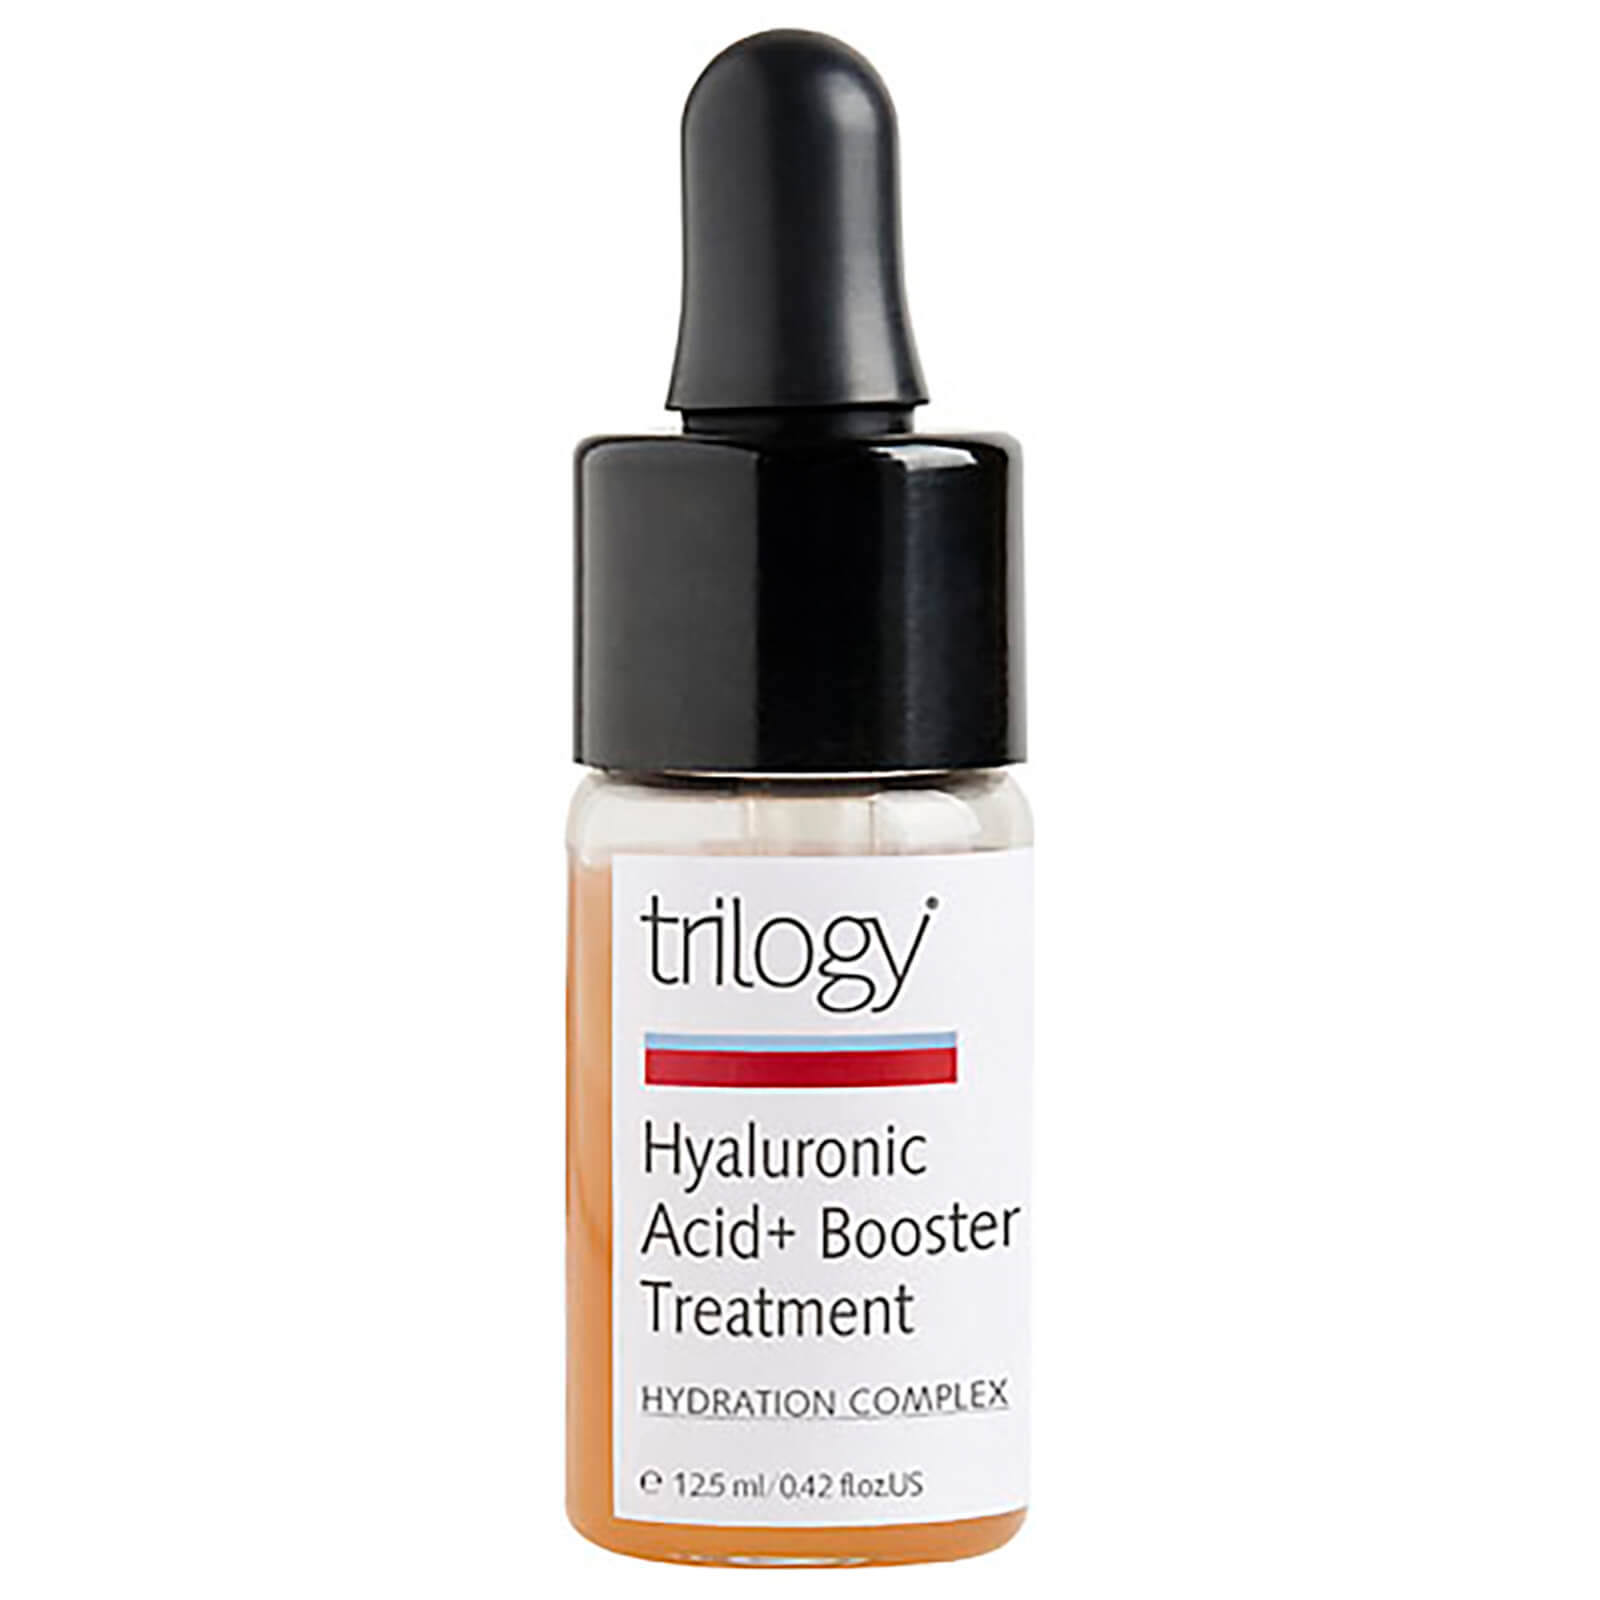 Trilogy Hyaluronic Acid+ Booster Treatment (For Dehydrated/ Dry Skin) 12.5ml